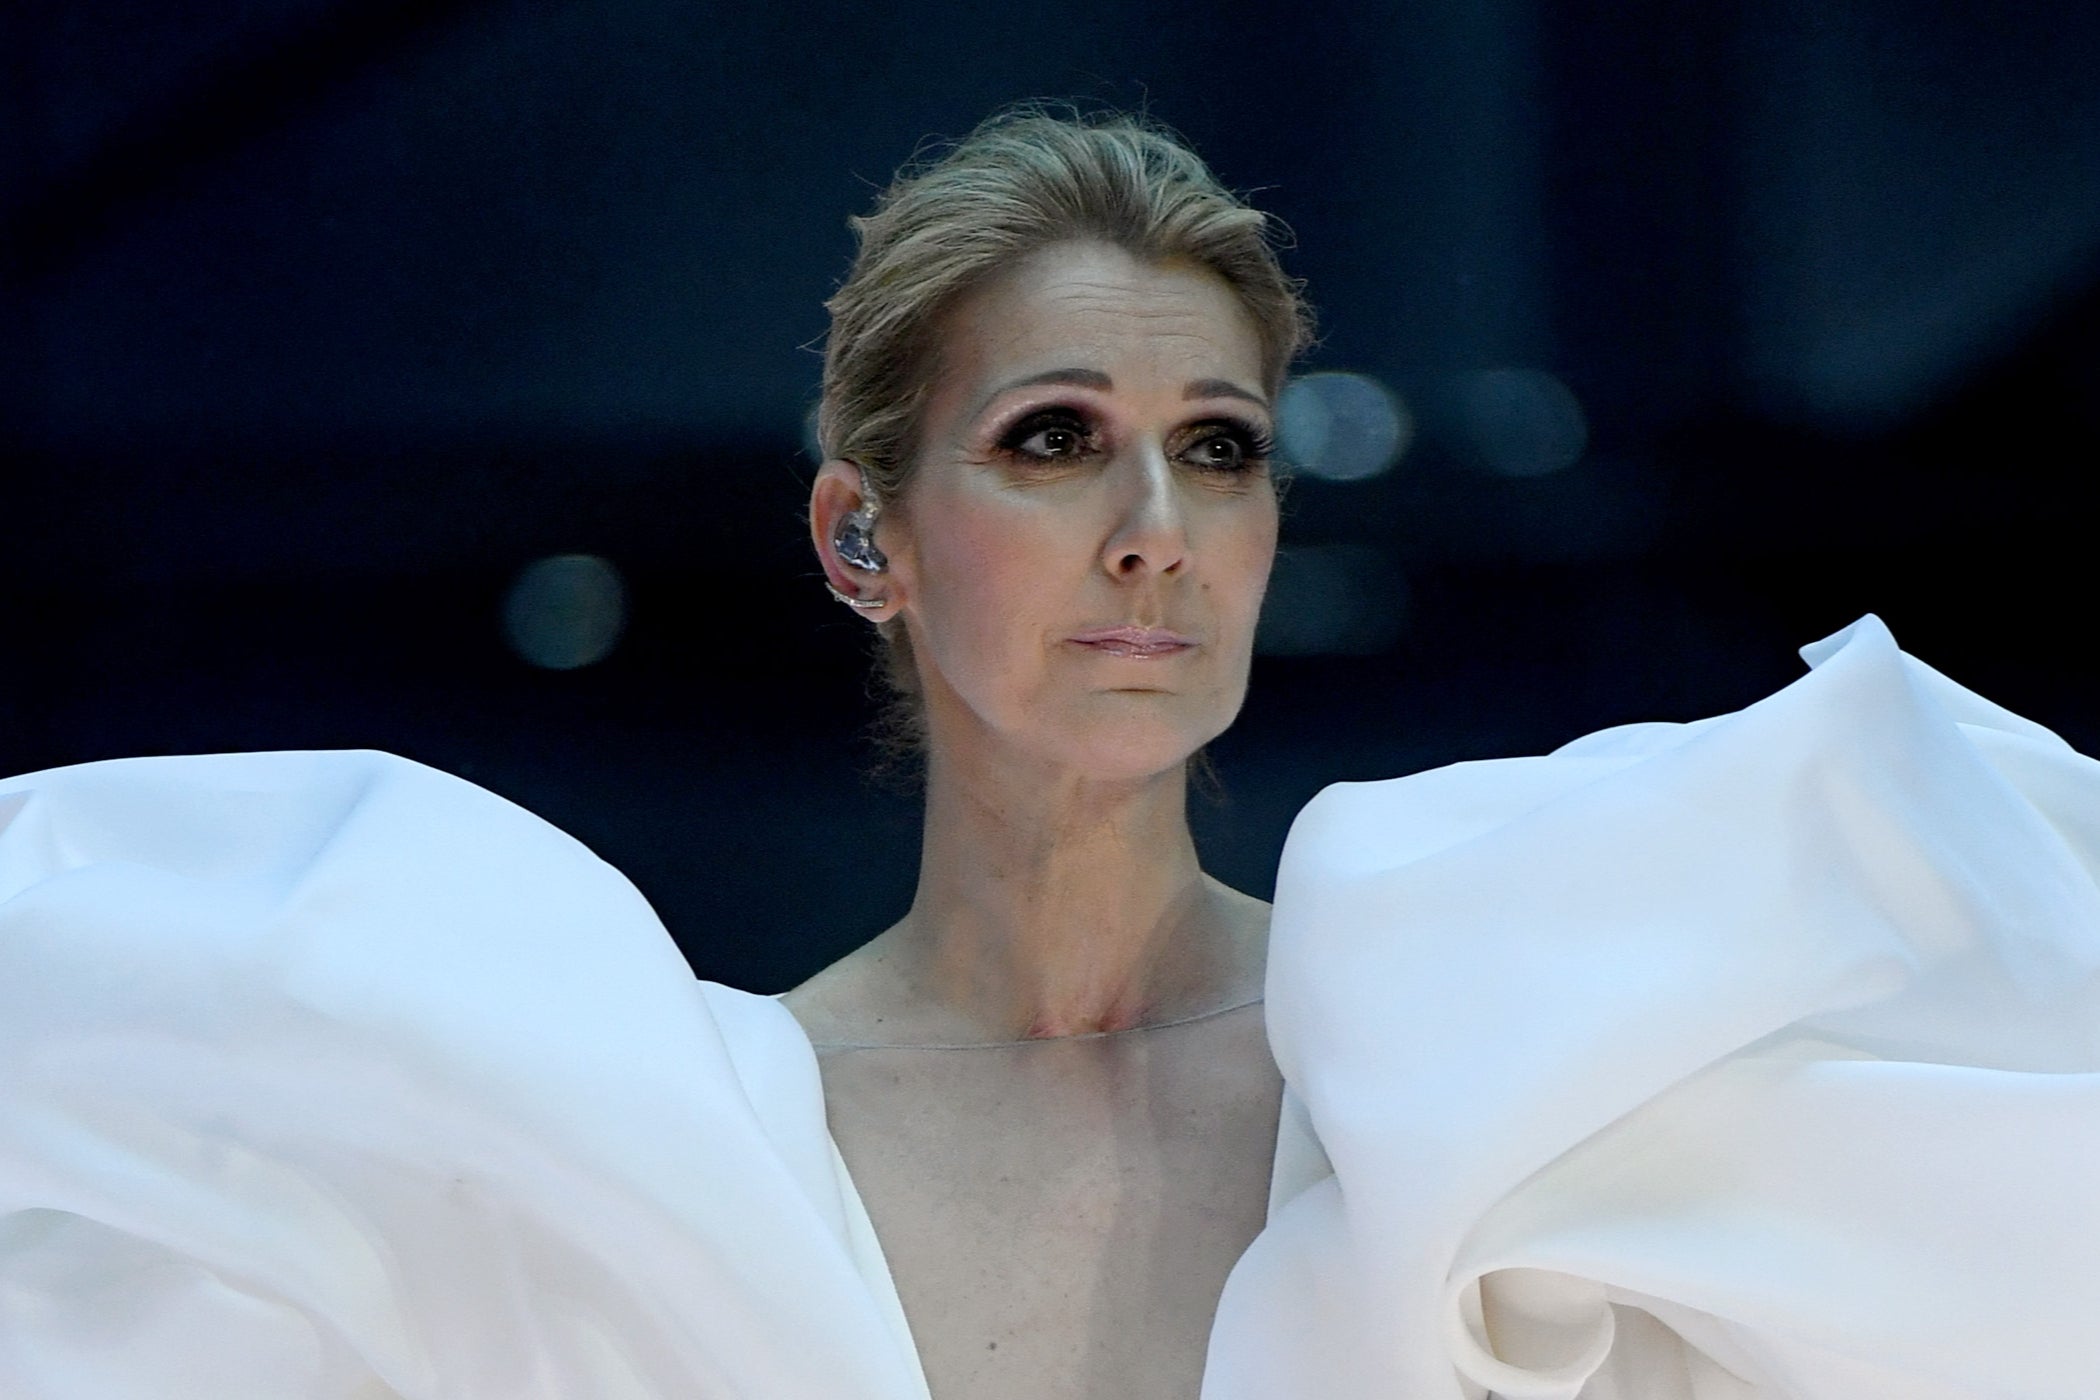 Celine Dion said pain medication stopped working as she was taking dangerously high doses